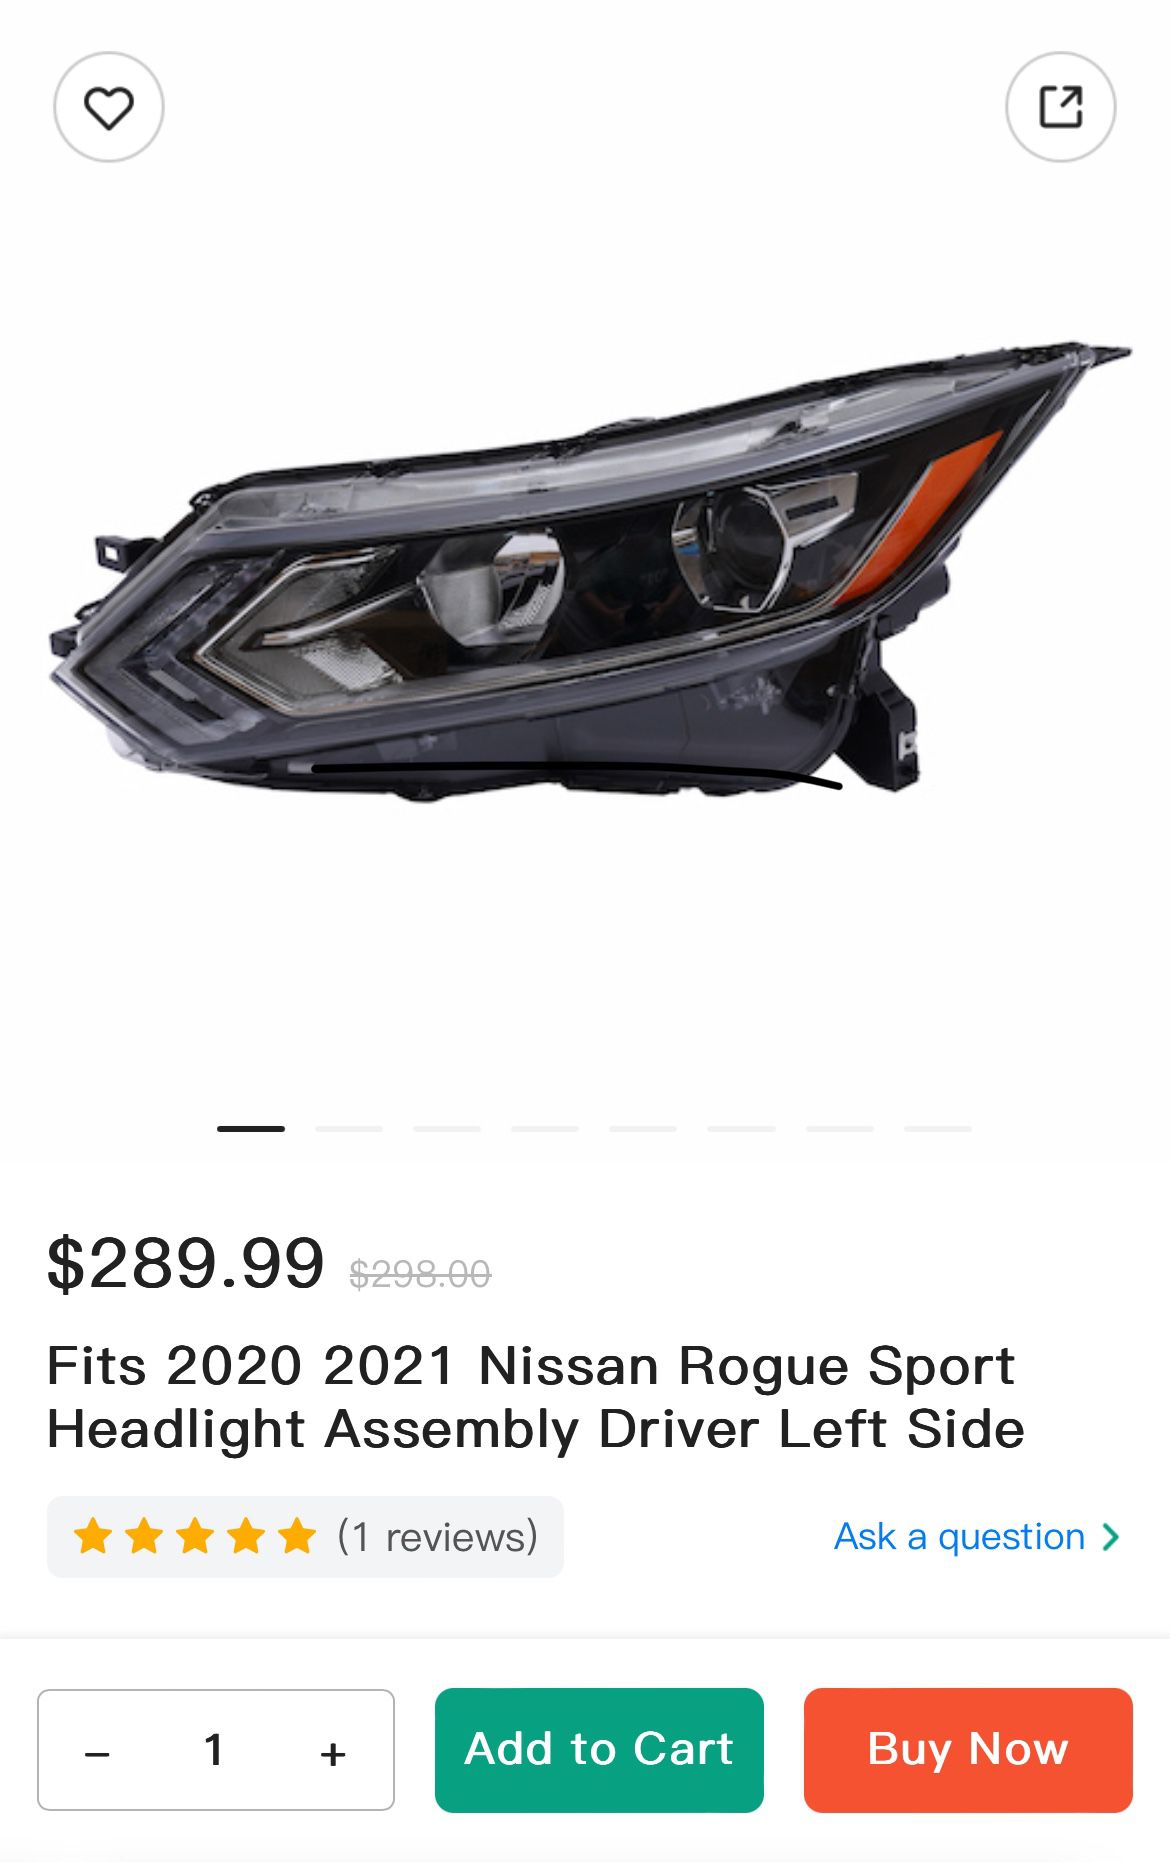 Fits 2020 2021 Nissan Rogue Sport Headlight Assembly Driver Left Side